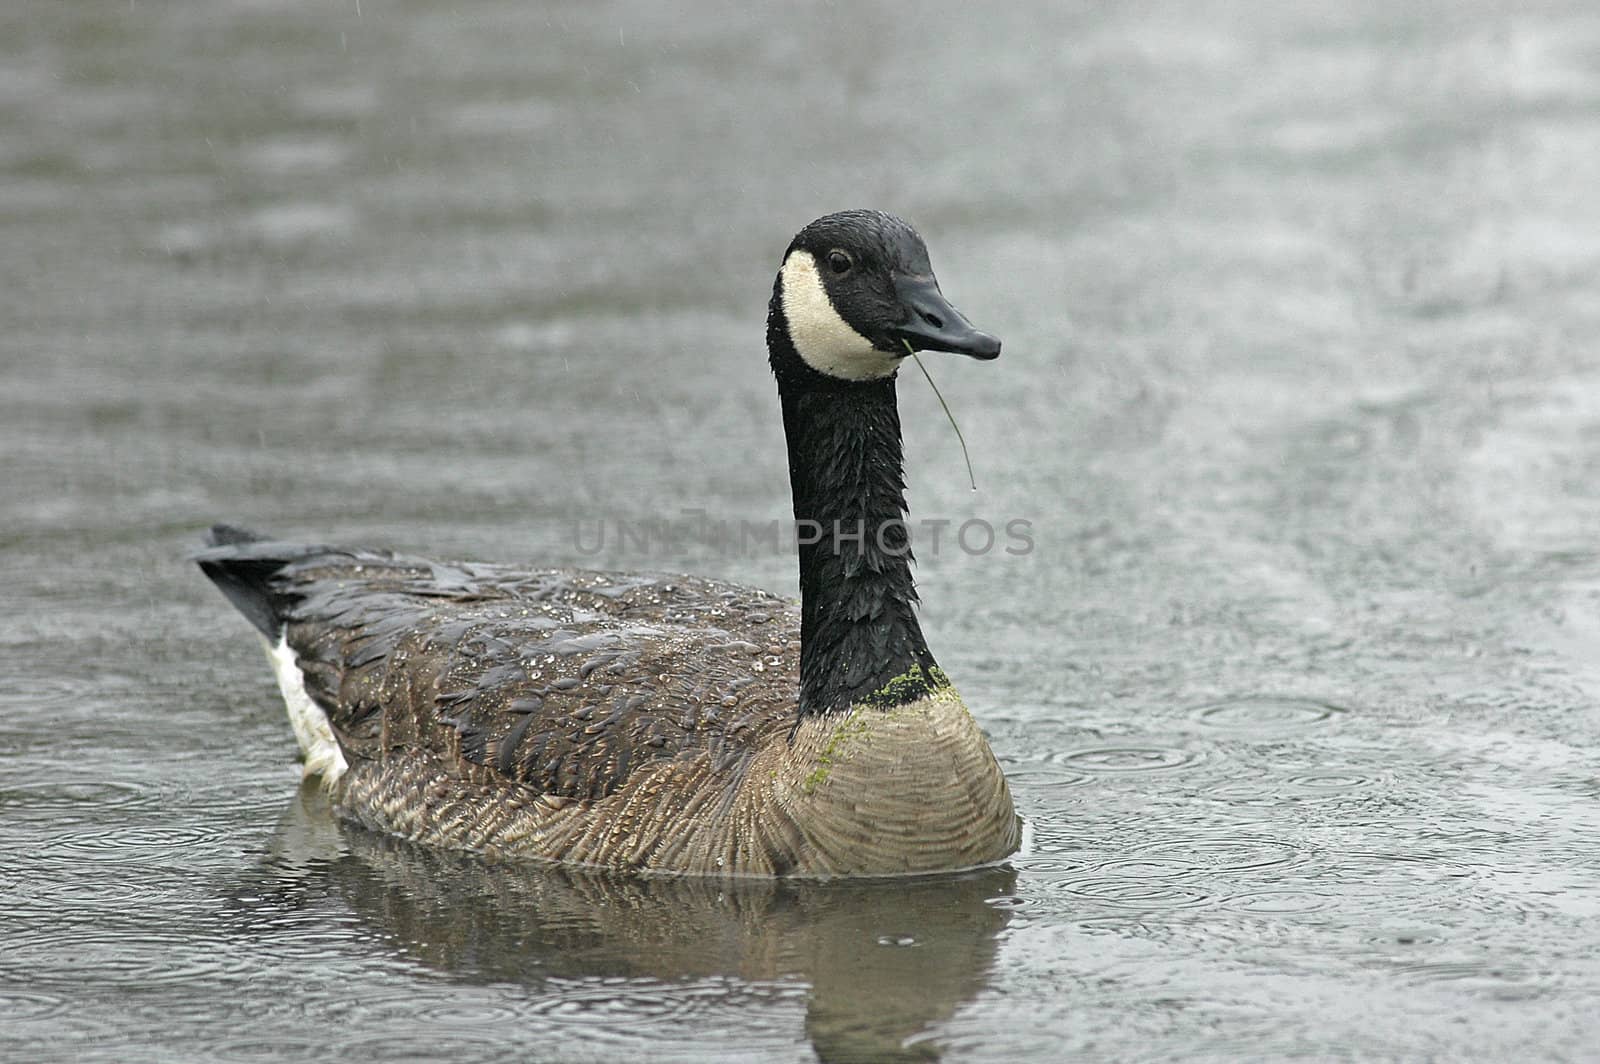 Goose swimming by with a straw in it's beak